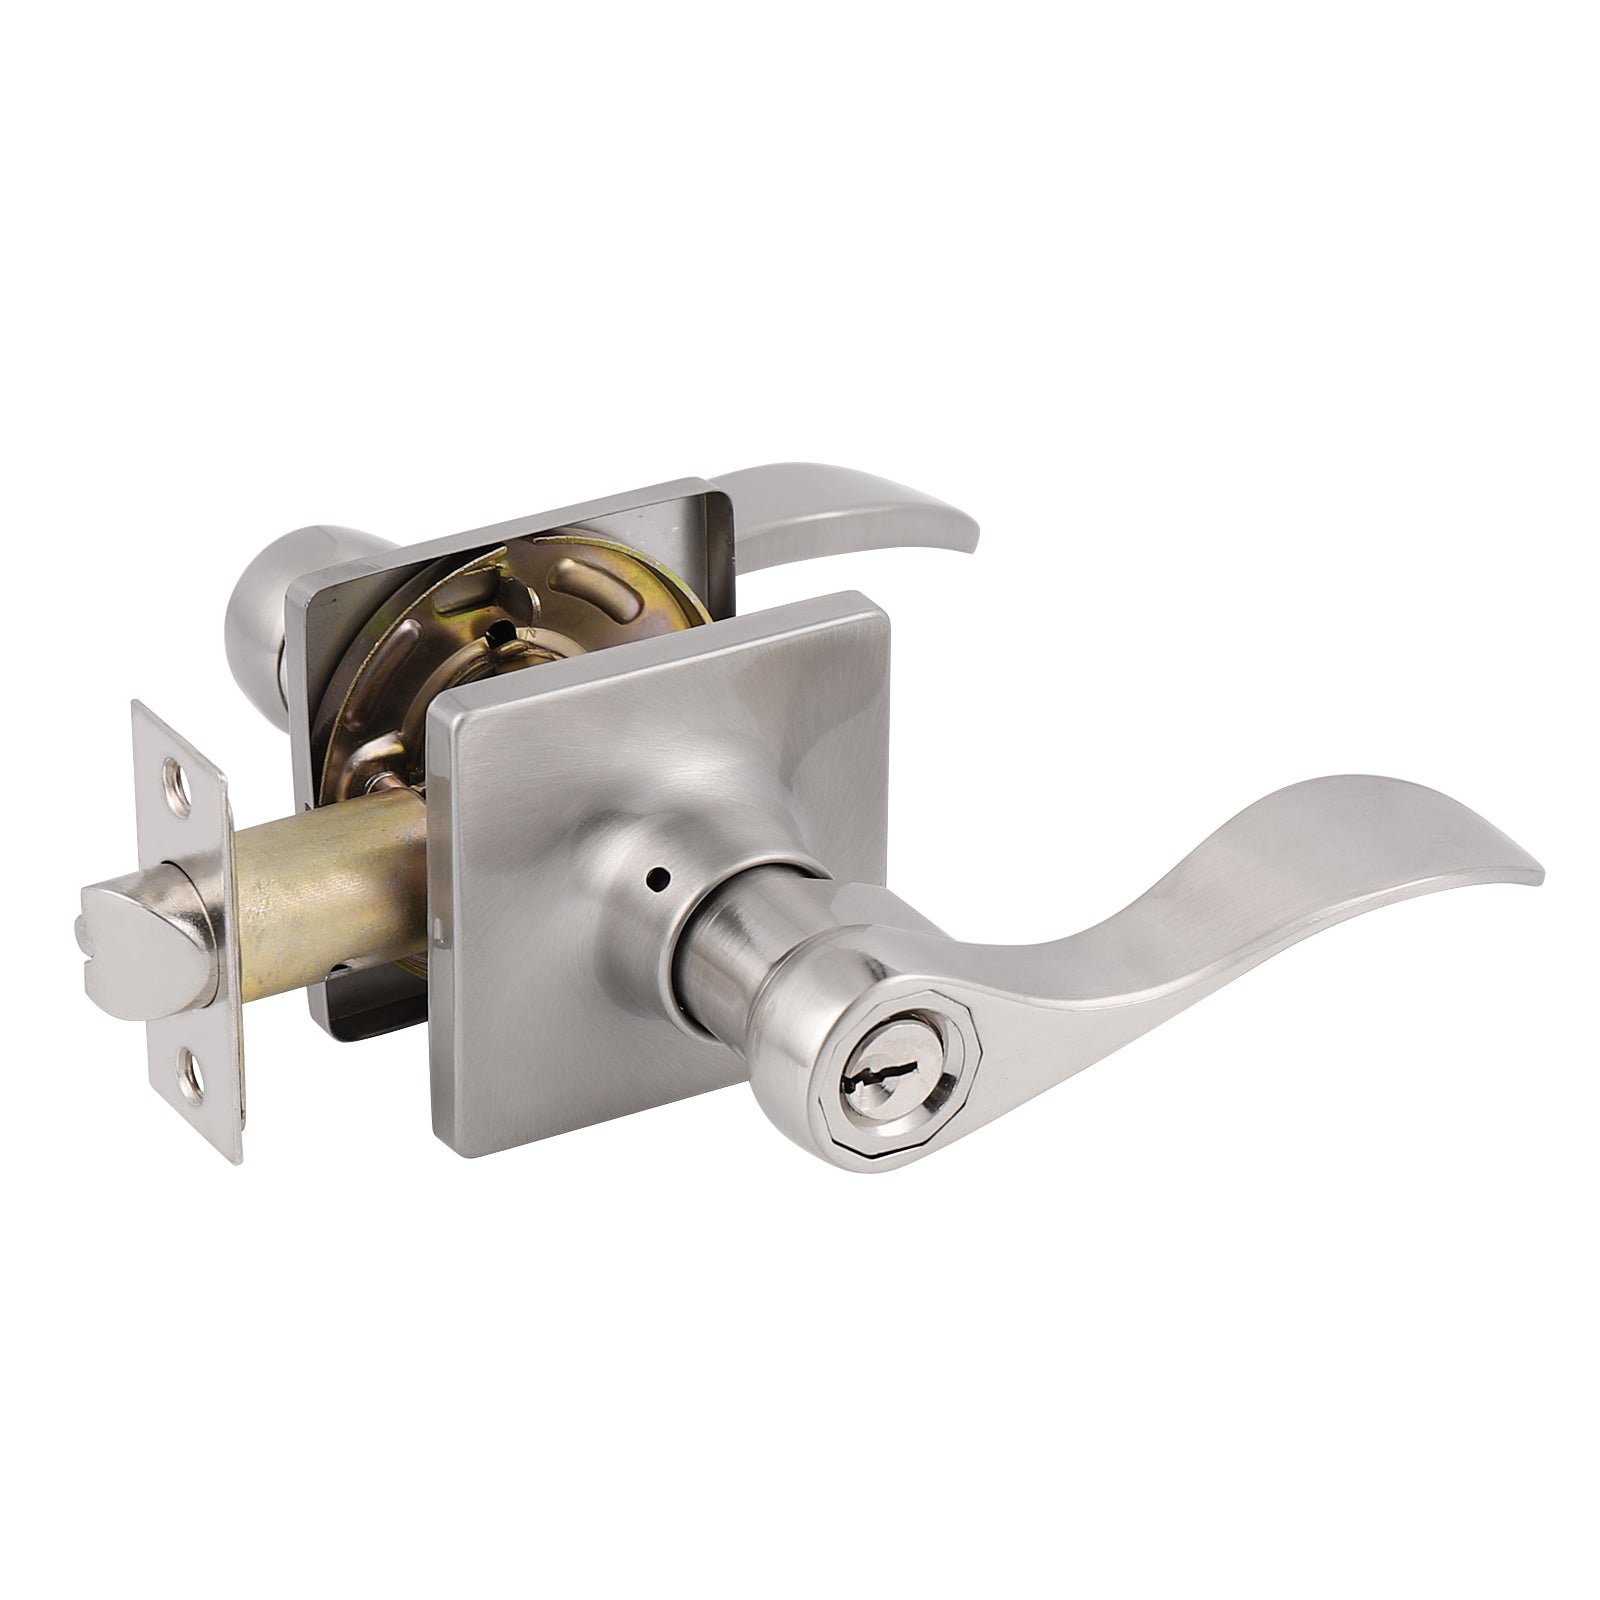 Wave Style Door Handles with Square Rosette, Entry Keyed/Privacy Lock/Passage/Dummy Lever Brushed Nickel Finish DLSQ061SN